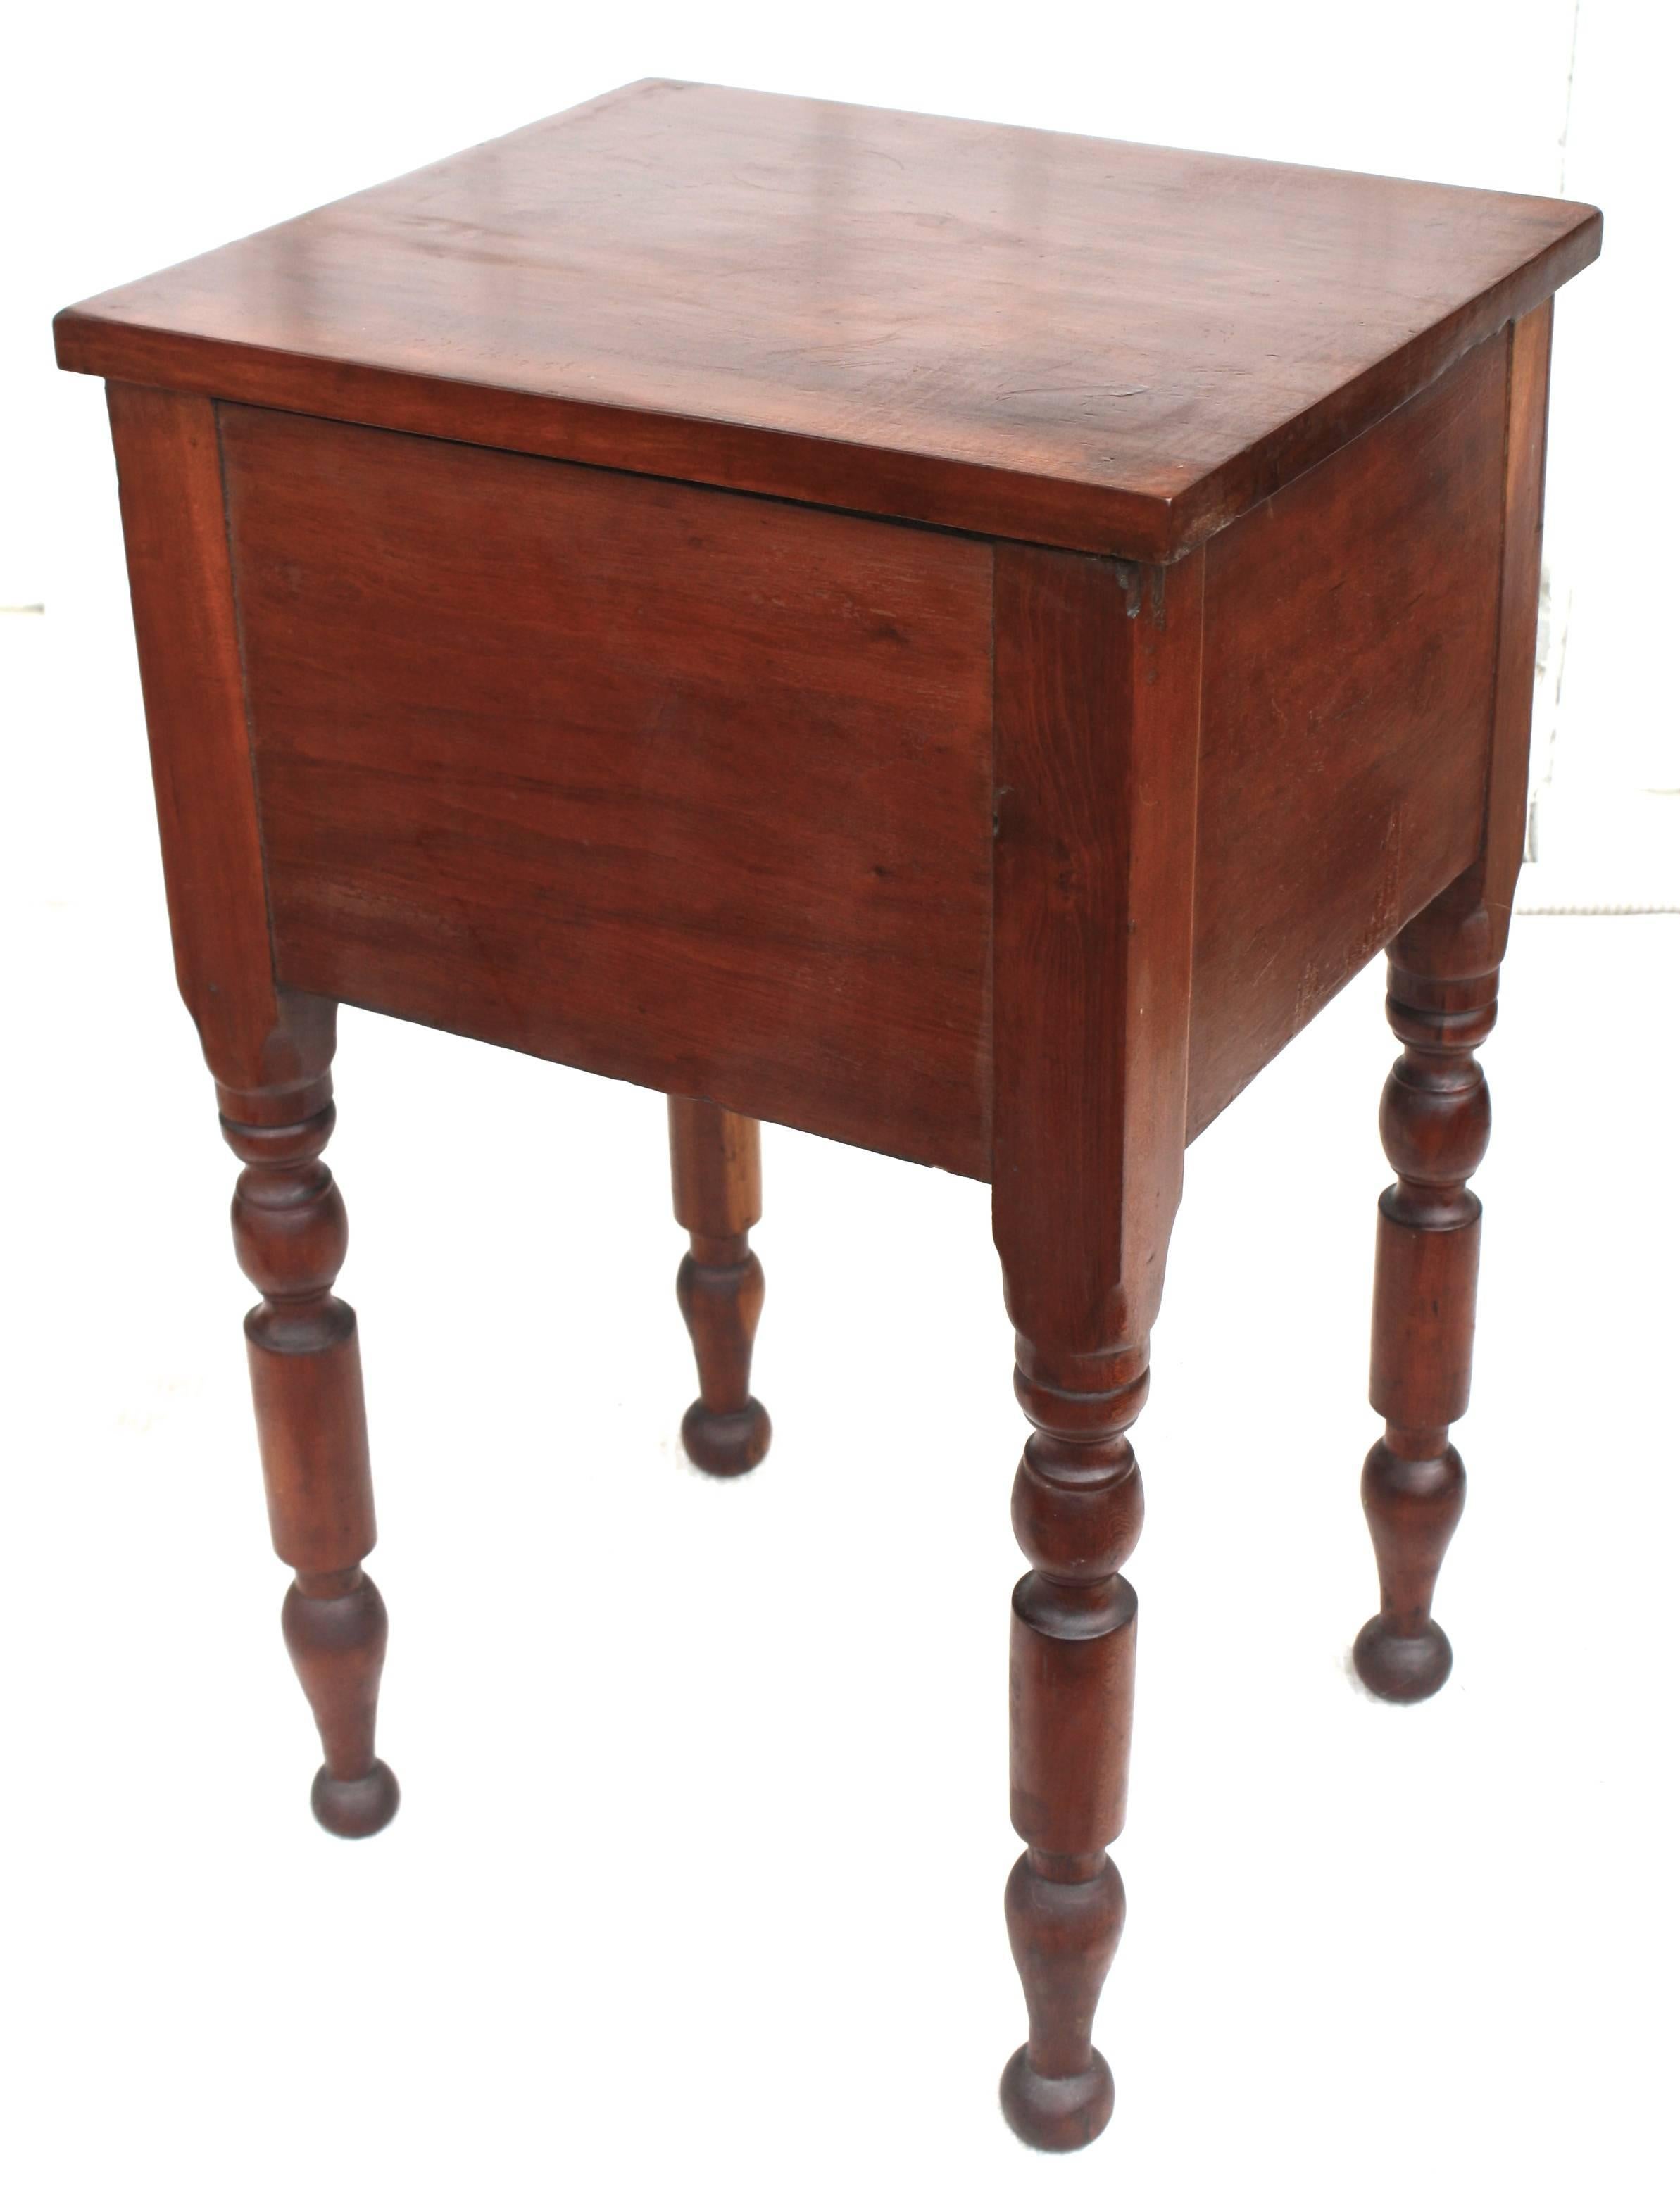 American Classical Baluster Legged Cherrywood Side Table For Sale 2